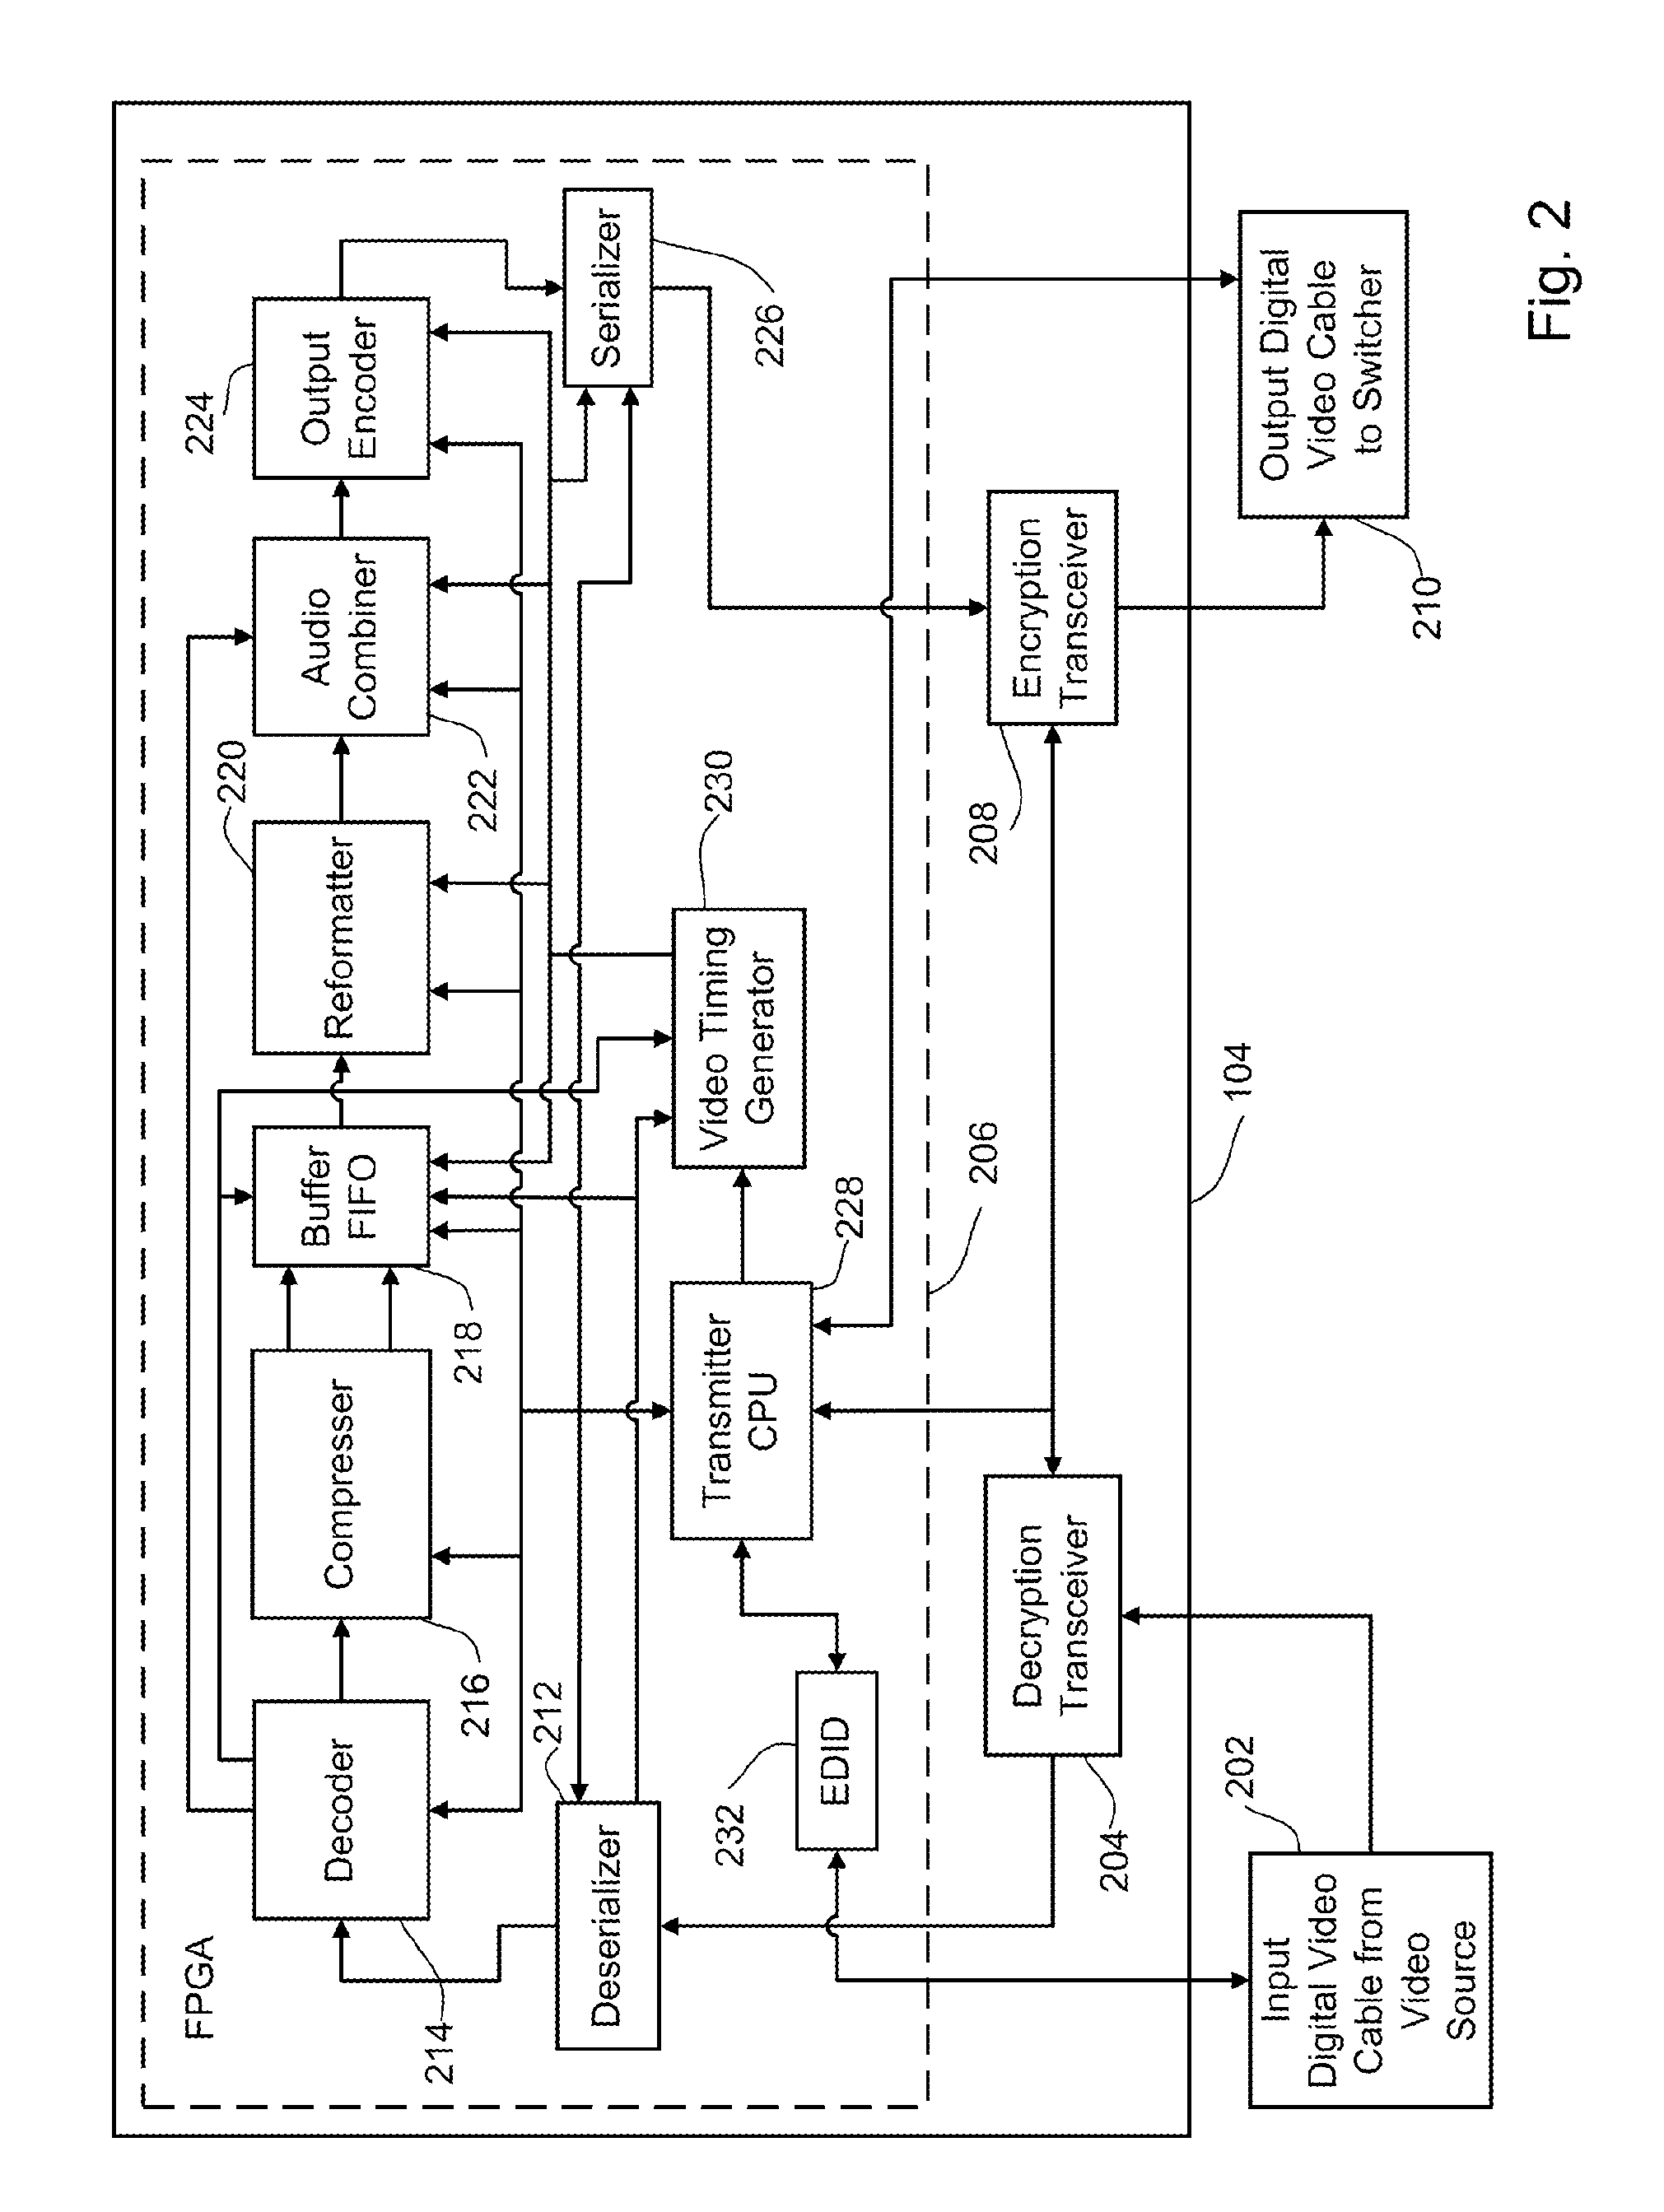 System and Method for Compressing Video and Reformatting the Compressed Video to Simulate Uncompressed Video With a Lower Bandwidth